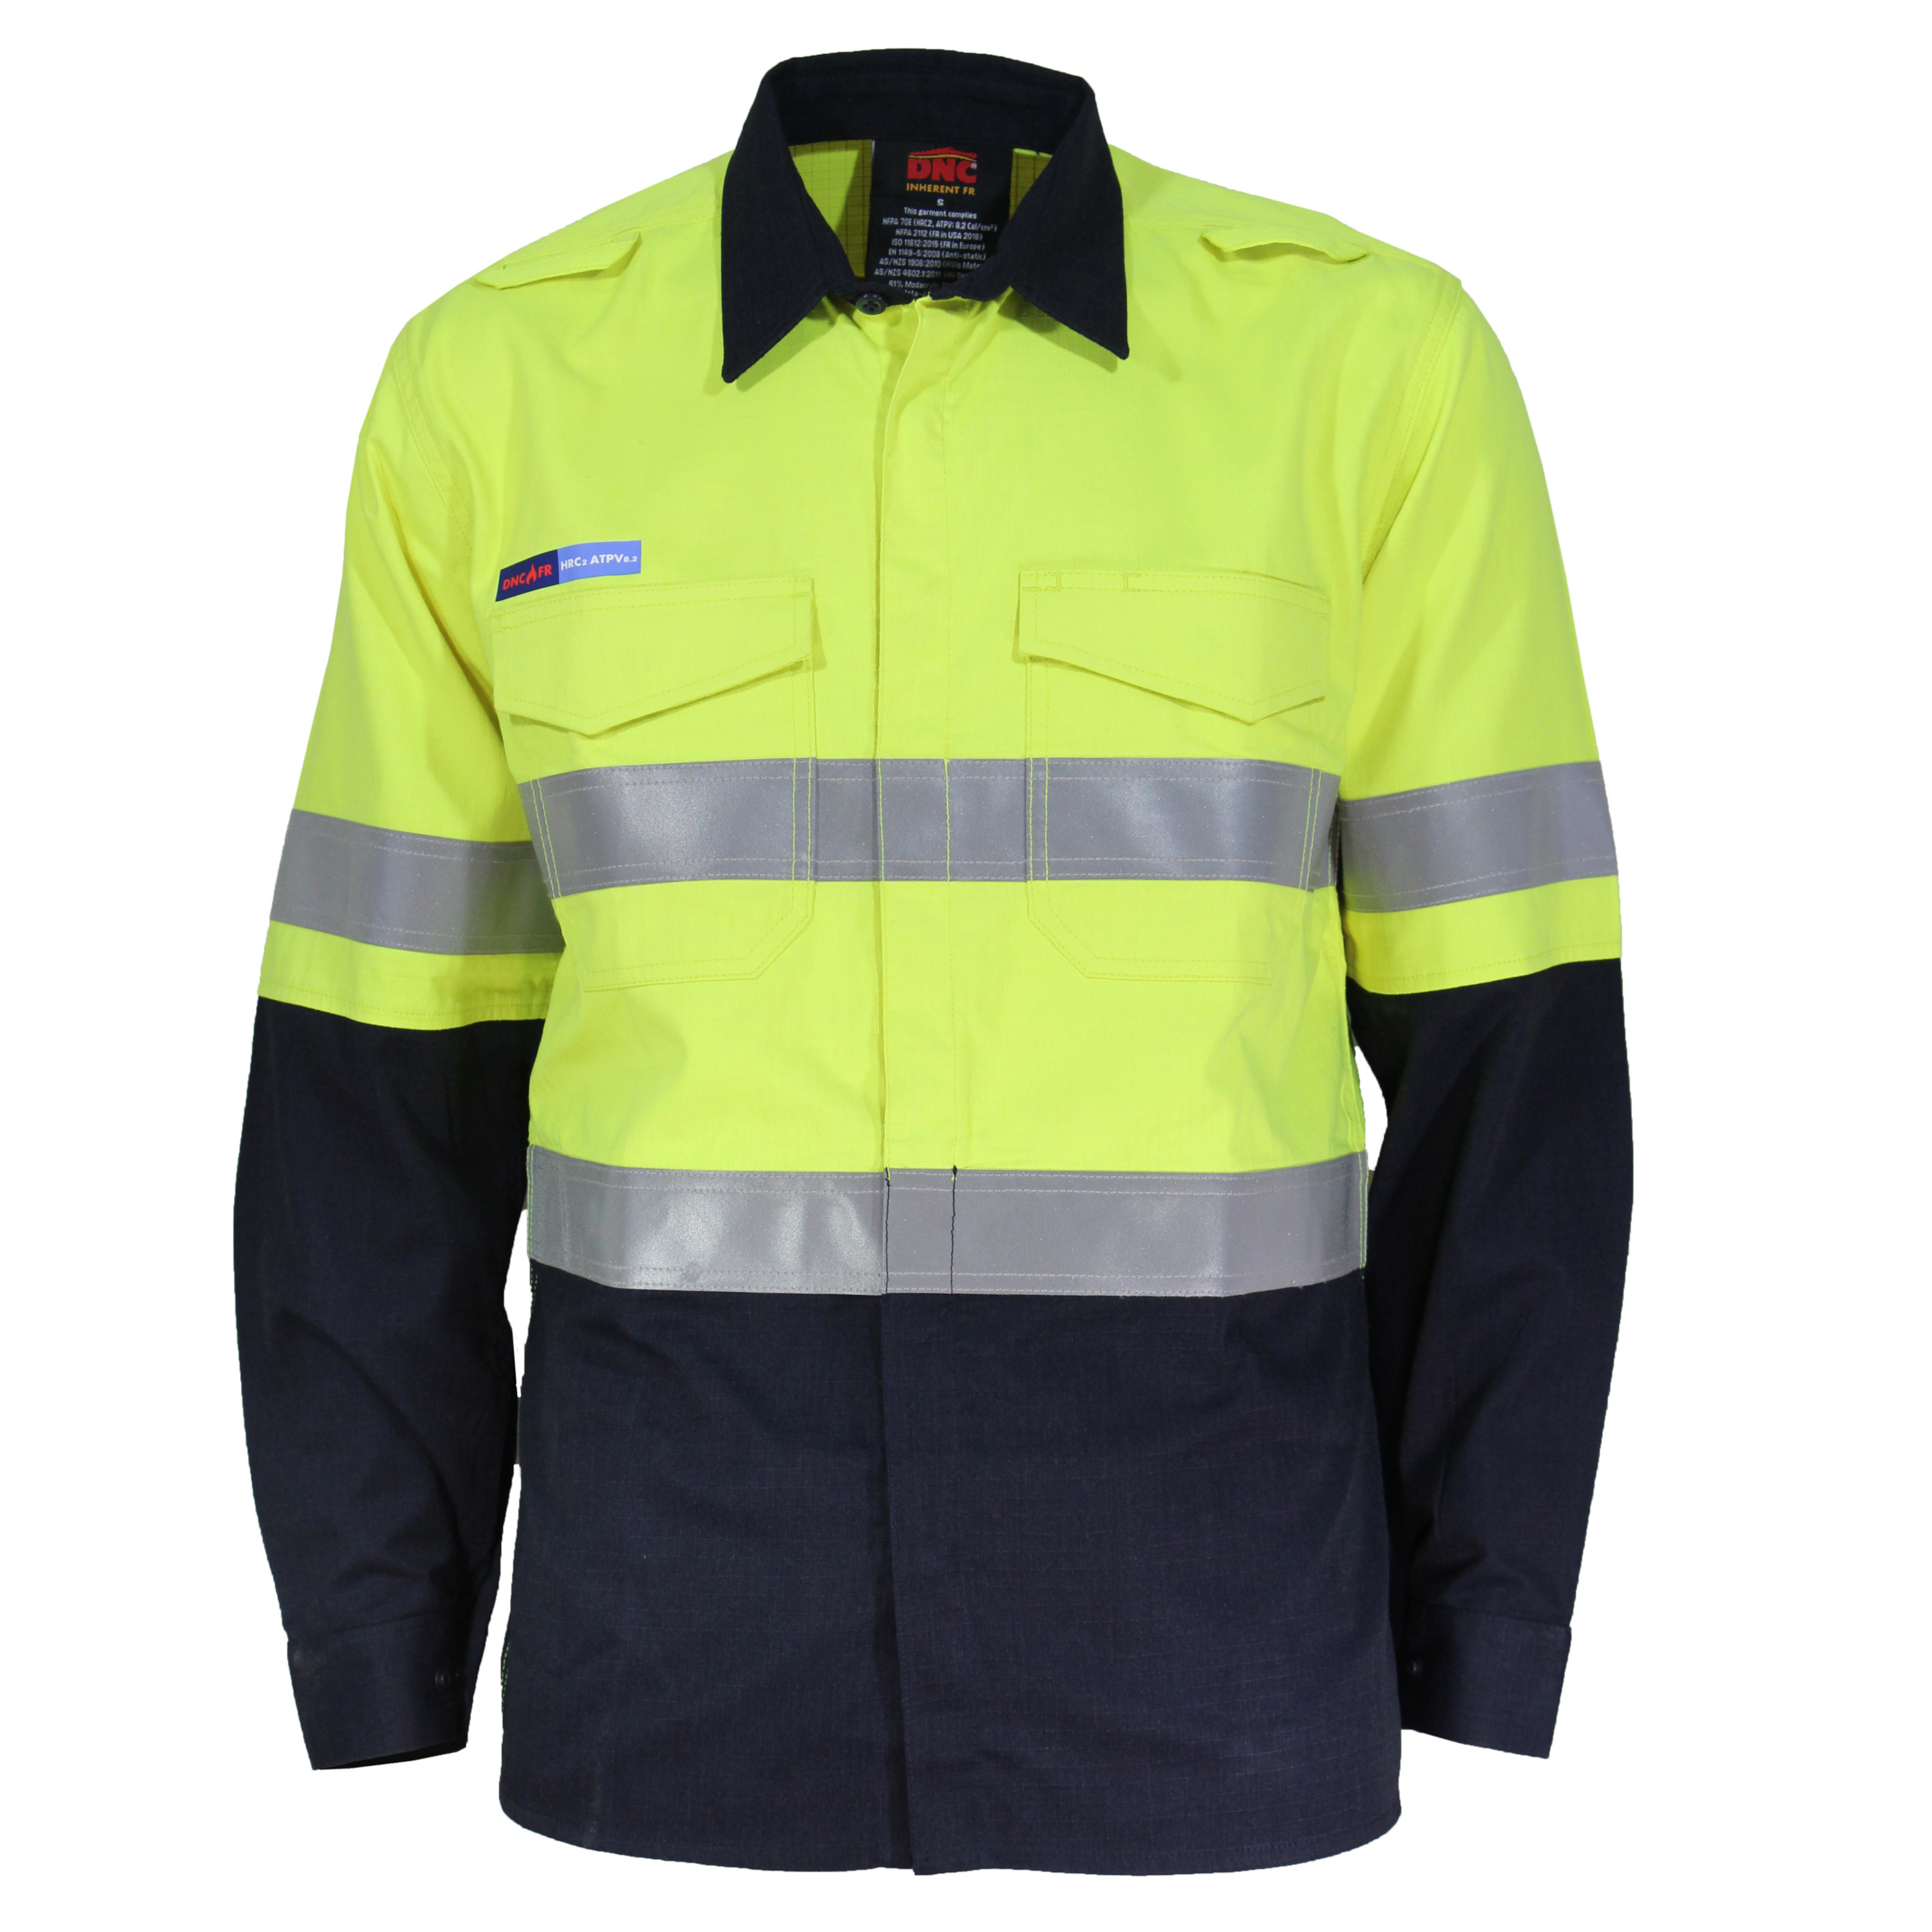 SHIRT INHERENT FR PPE2 Y/N TAPED 2XL -230gsm RIPSTOP VENTED